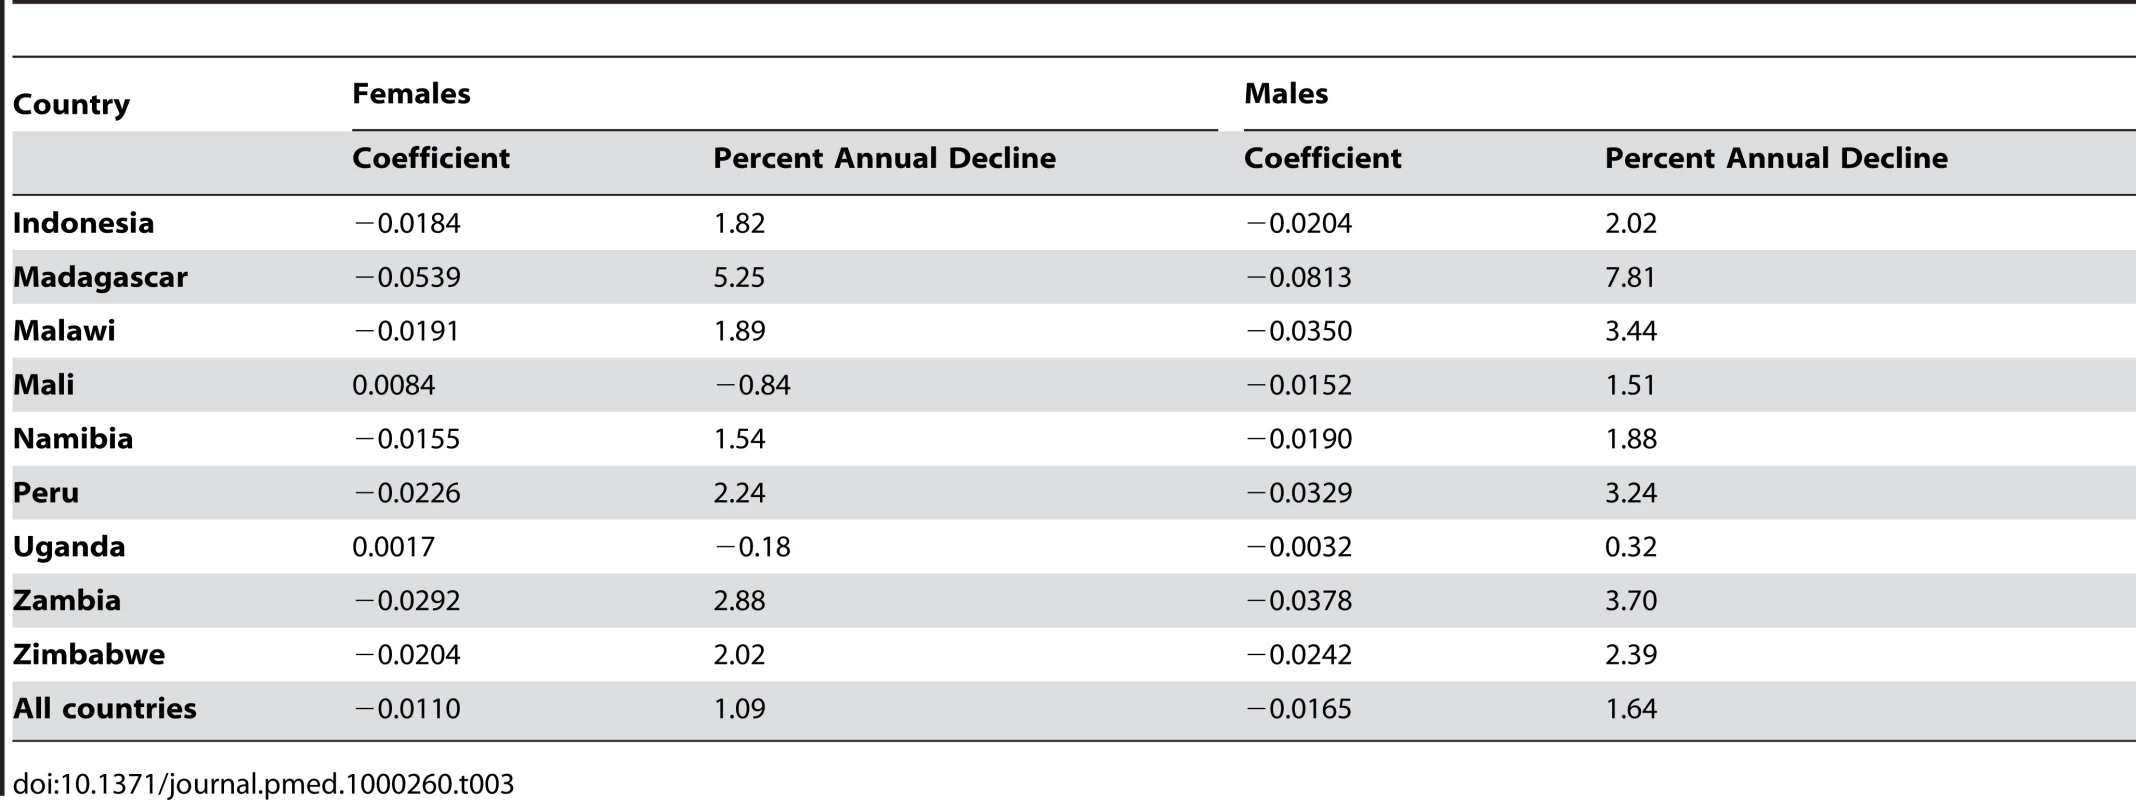 &lt;i&gt;TiPS&lt;/i&gt; regression coefficients for countries with three or more surveys and percent decline in mortality rates per year prior to the survey attributable to recall bias.